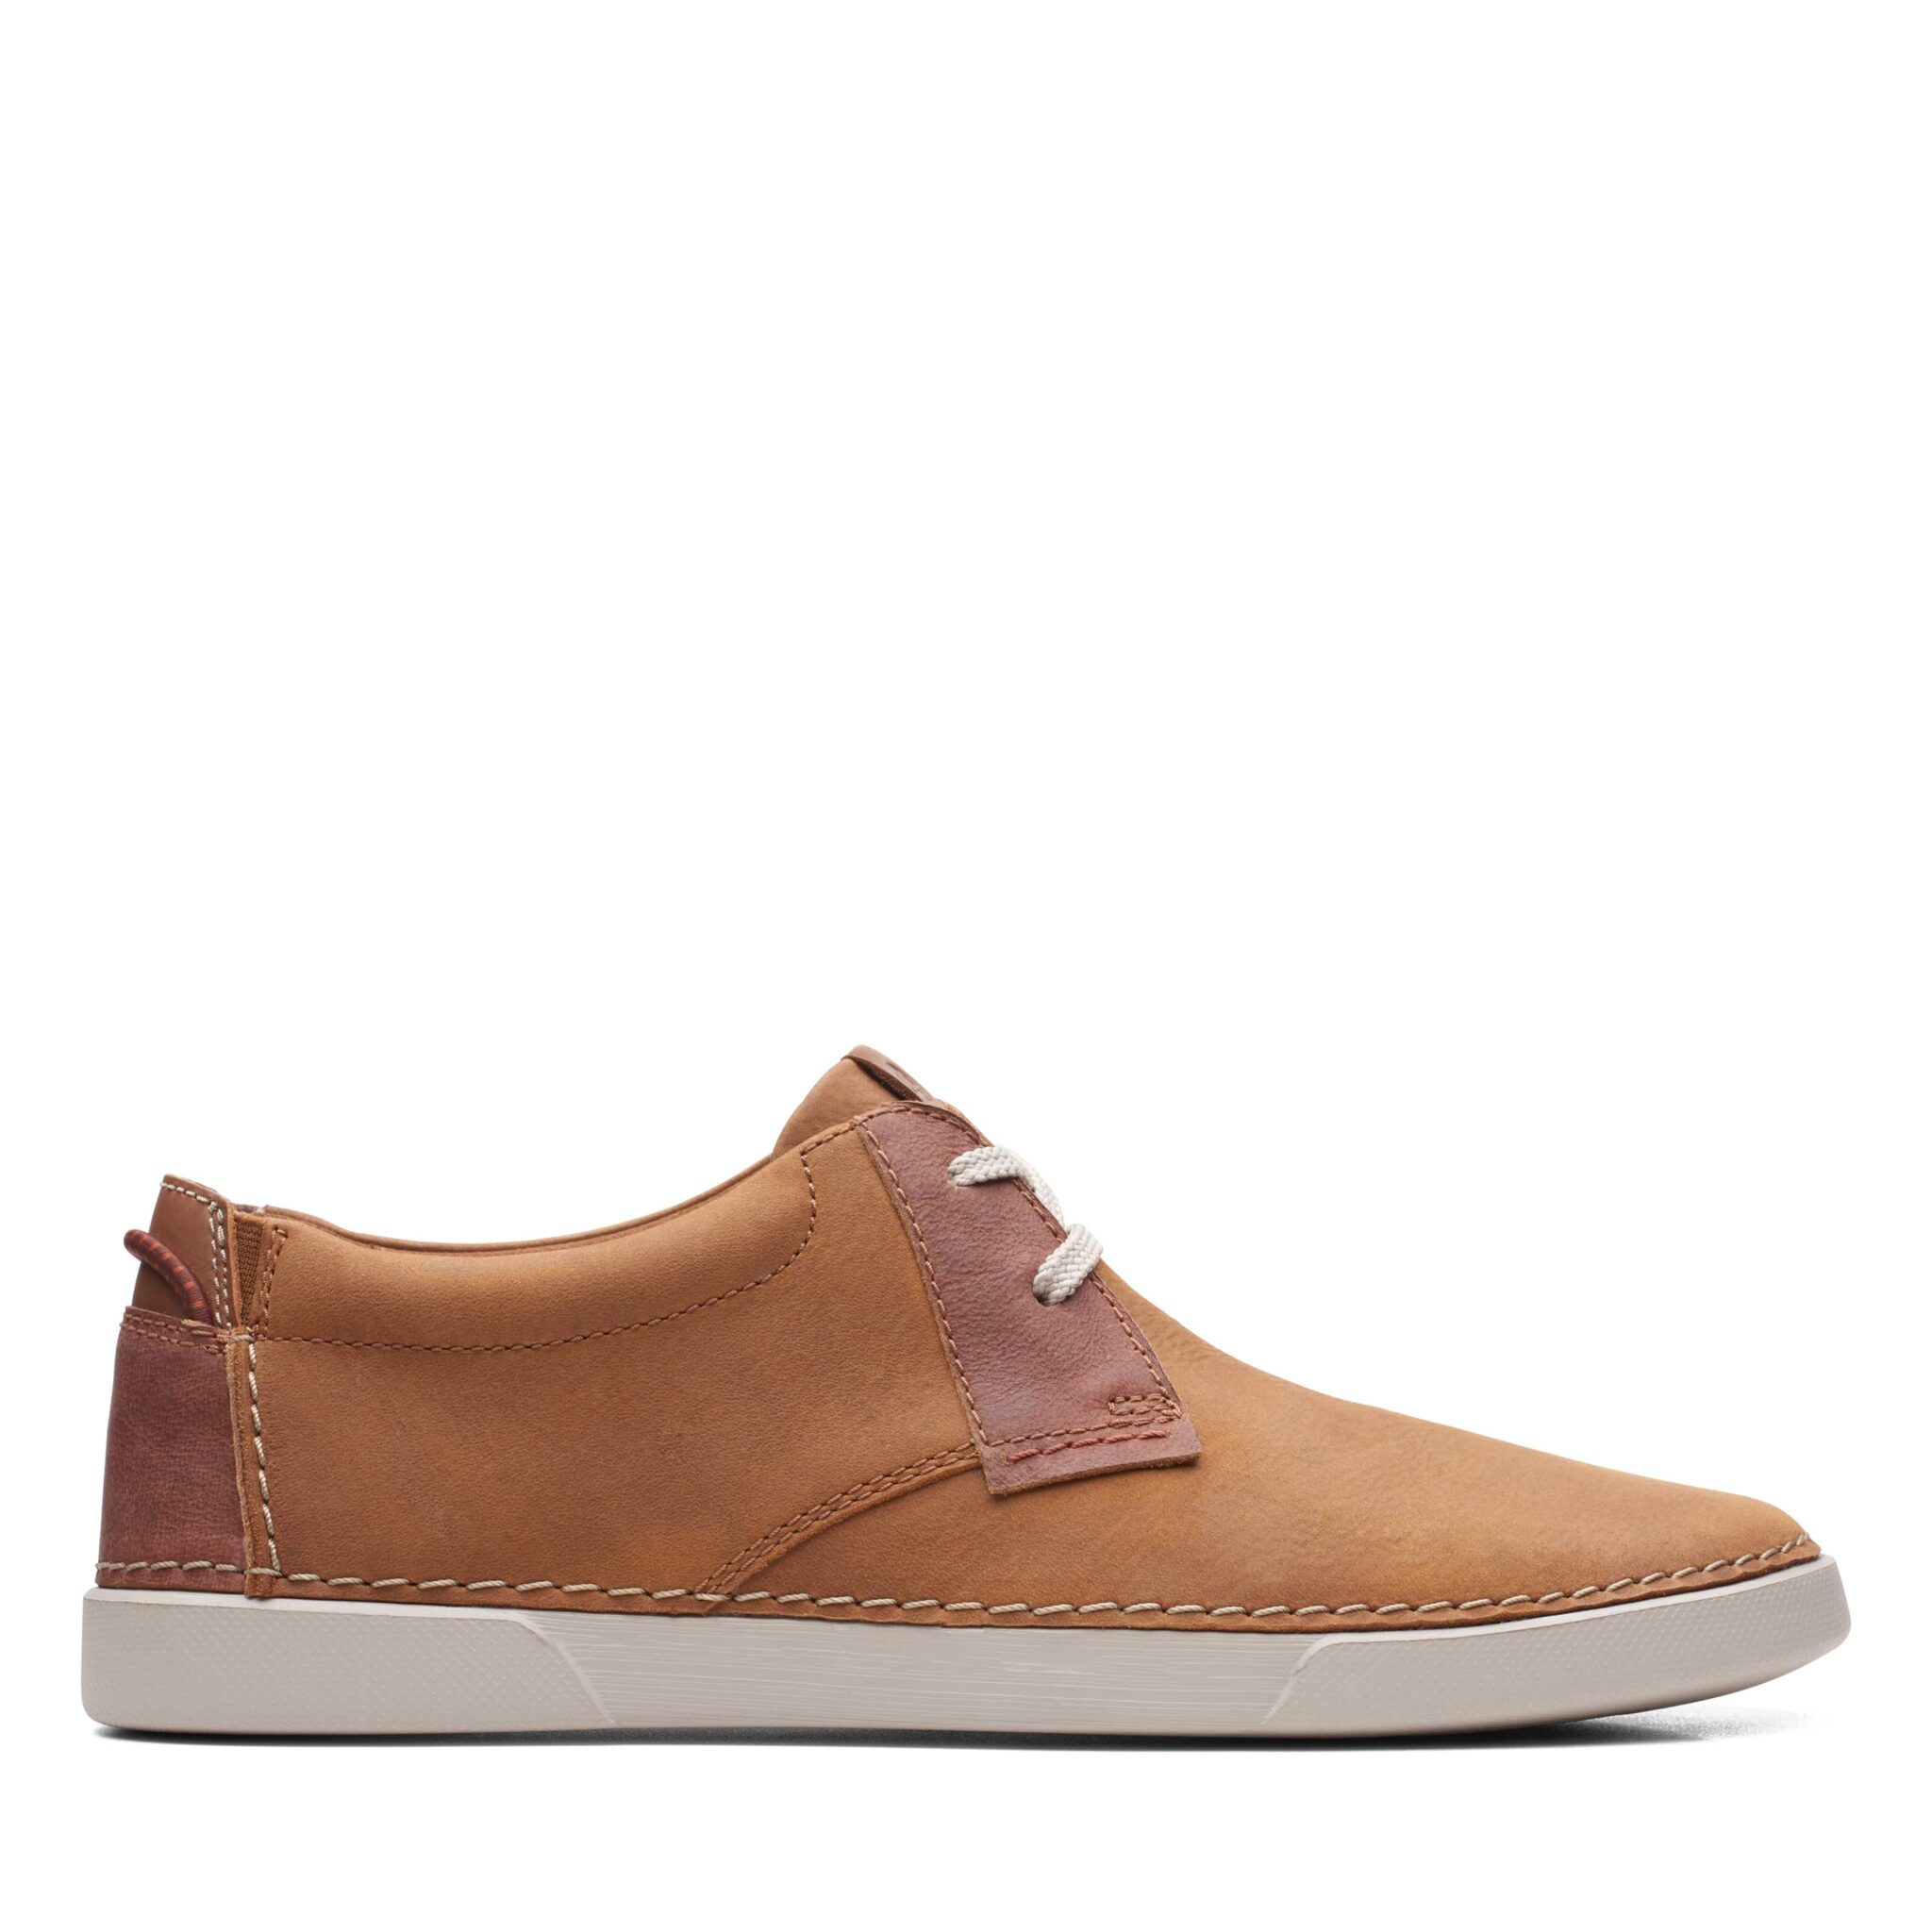 Men's Clarks Gereld Low - Tan Leather | Stan's Fit For Your Feet